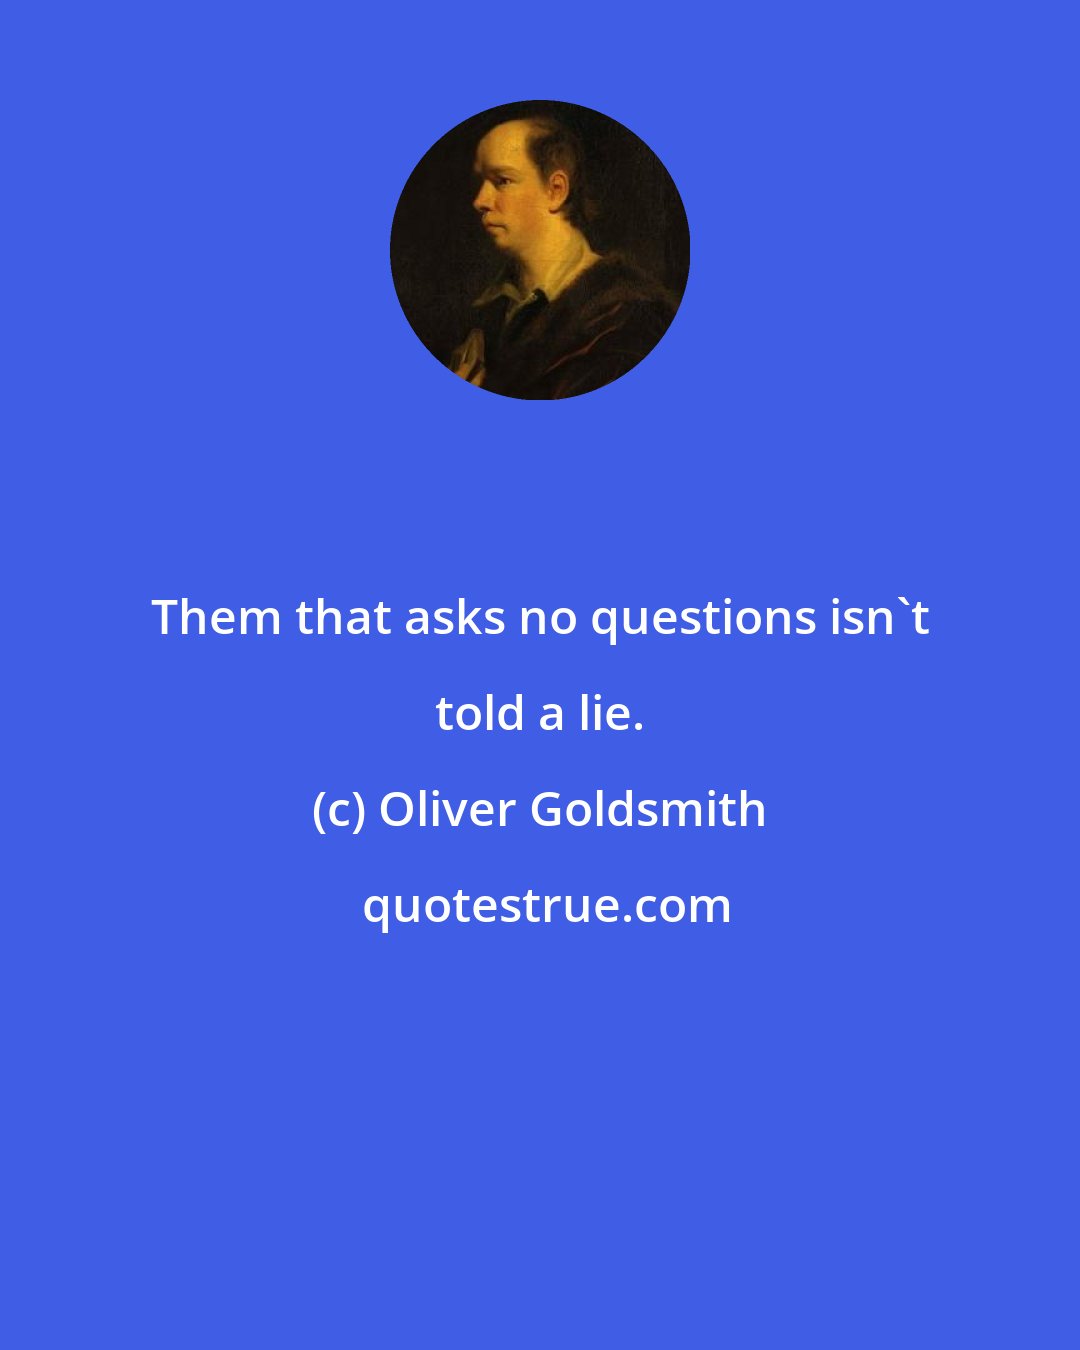 Oliver Goldsmith: Them that asks no questions isn't told a lie.